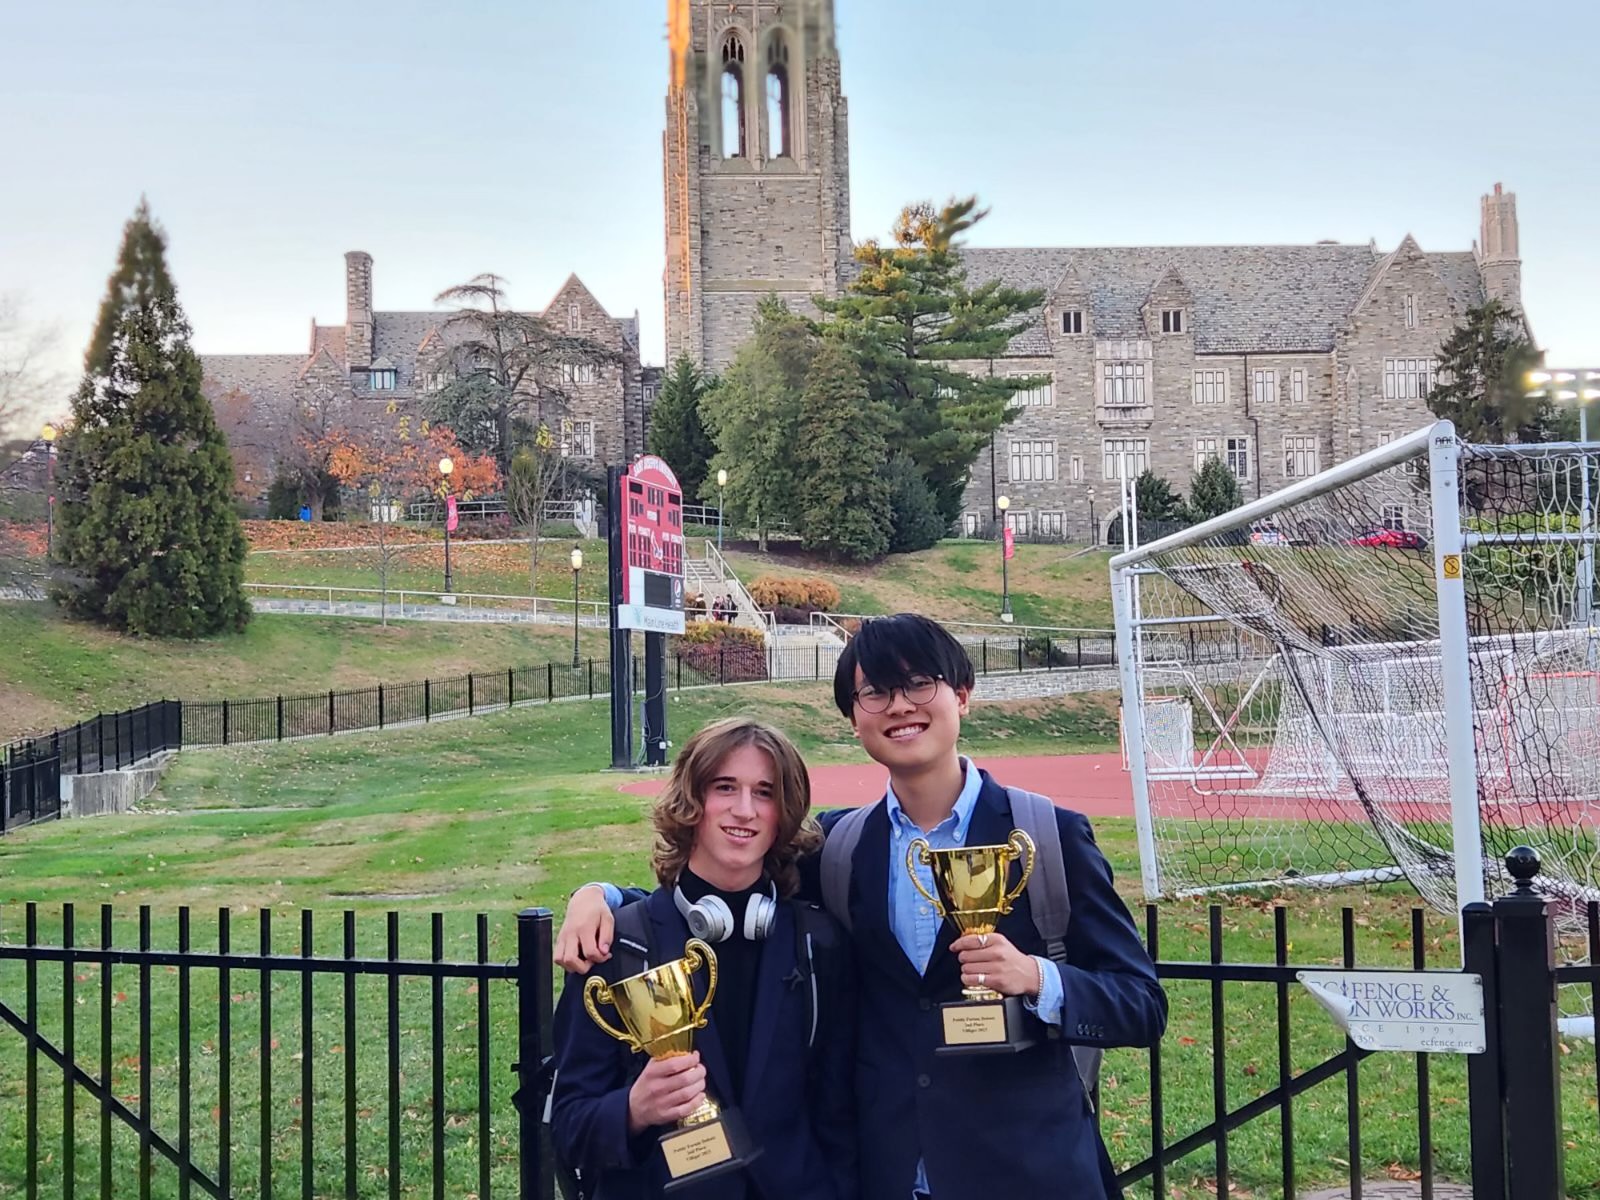 Sophomores Tobin Wilson (left) and Ryan Kang (right) holding their trophies after their success at the Villiger Tournament. The Villiger Tournament is a national debate competition held annually in Philadelphia.